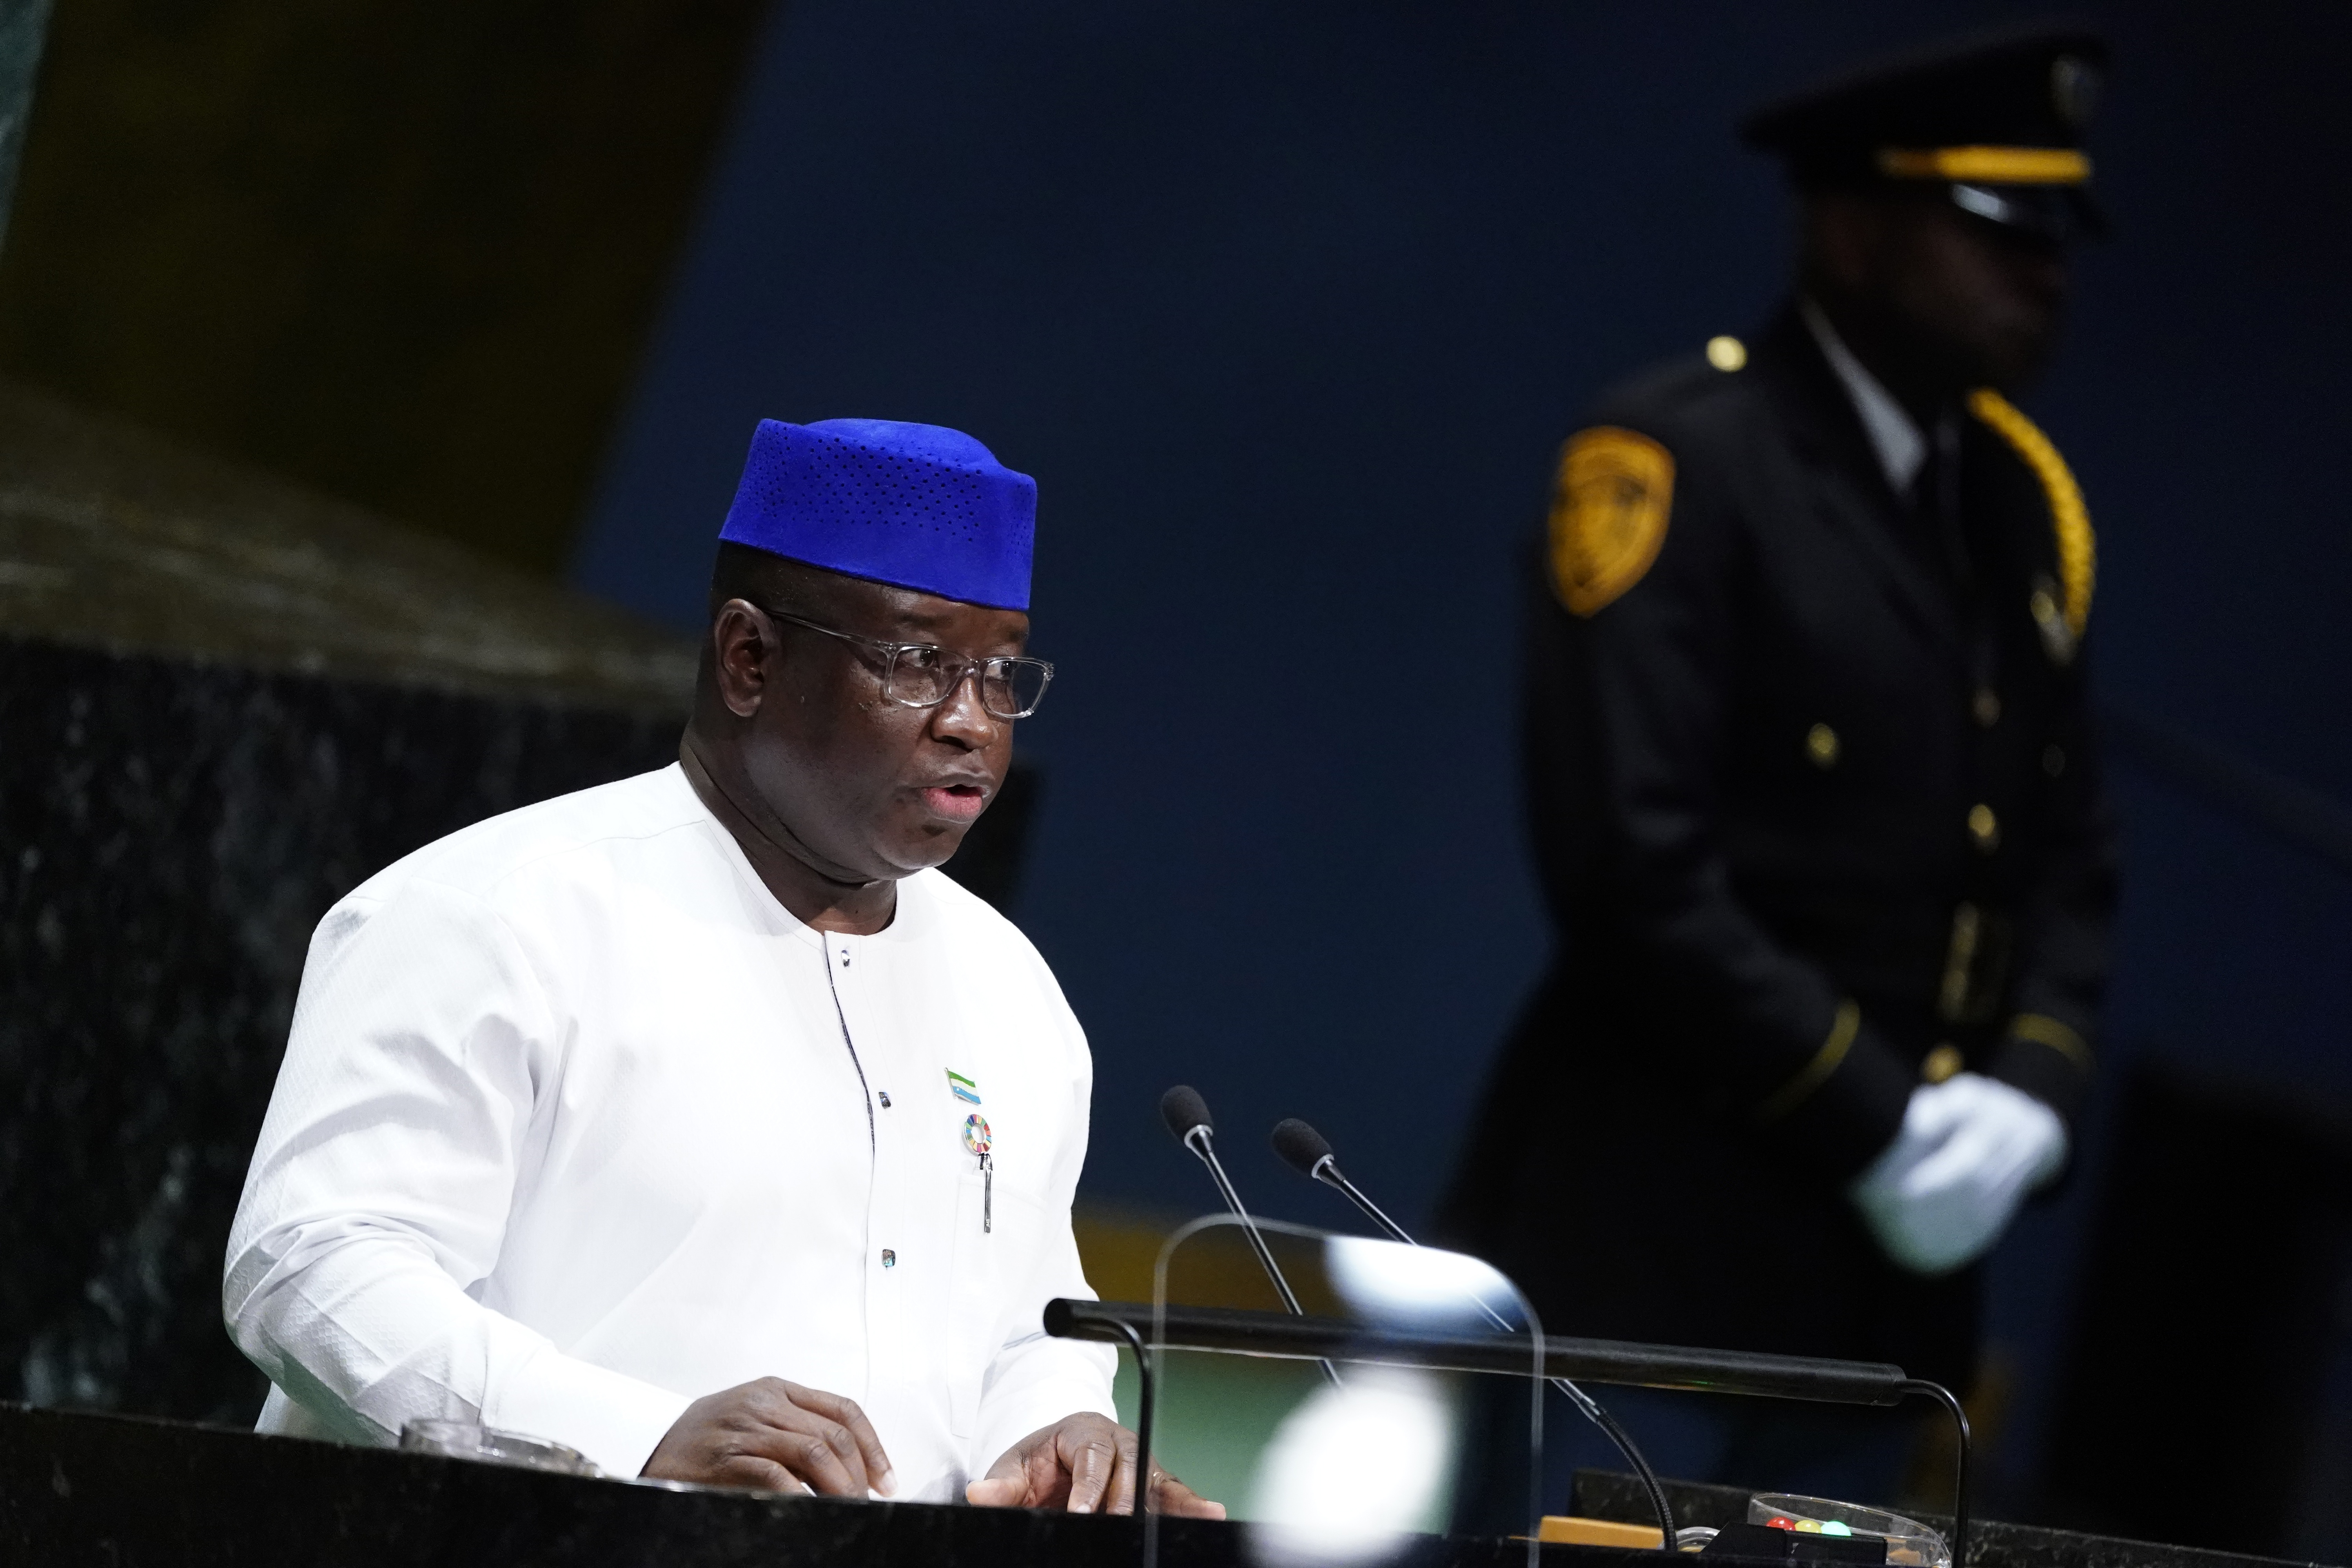 Sierra Leone's President Julius Maada Bio addresses the 74th session of the United Nations General Assembly at U.N. headquarters in New York City, New York, U.S.